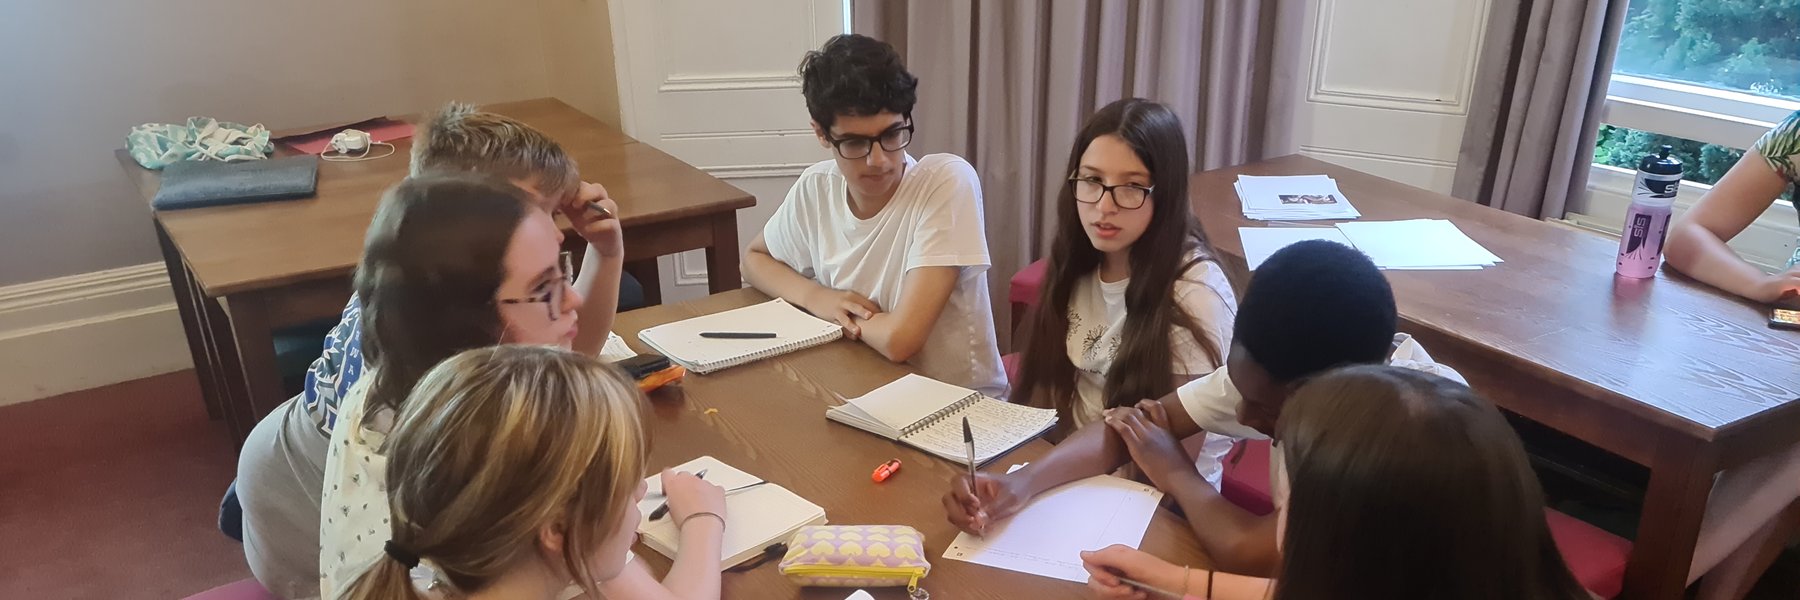 Seven young people plan a project sitting at a table with notepads and pens.